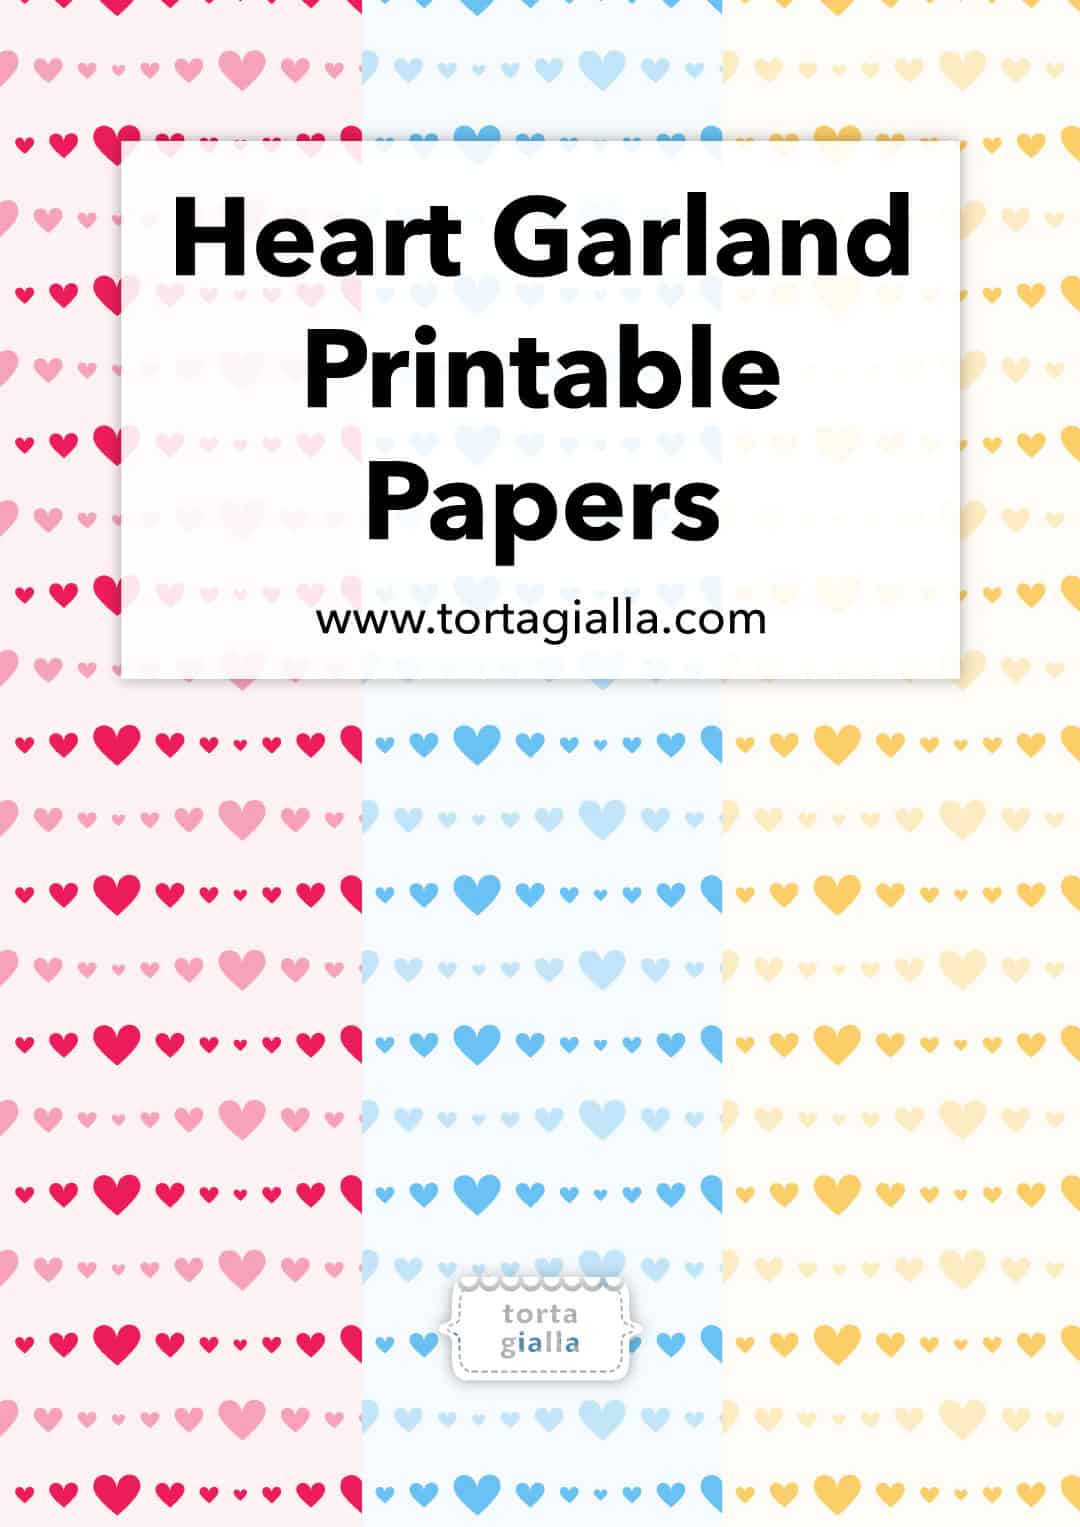 Heart Garland Printable Papers